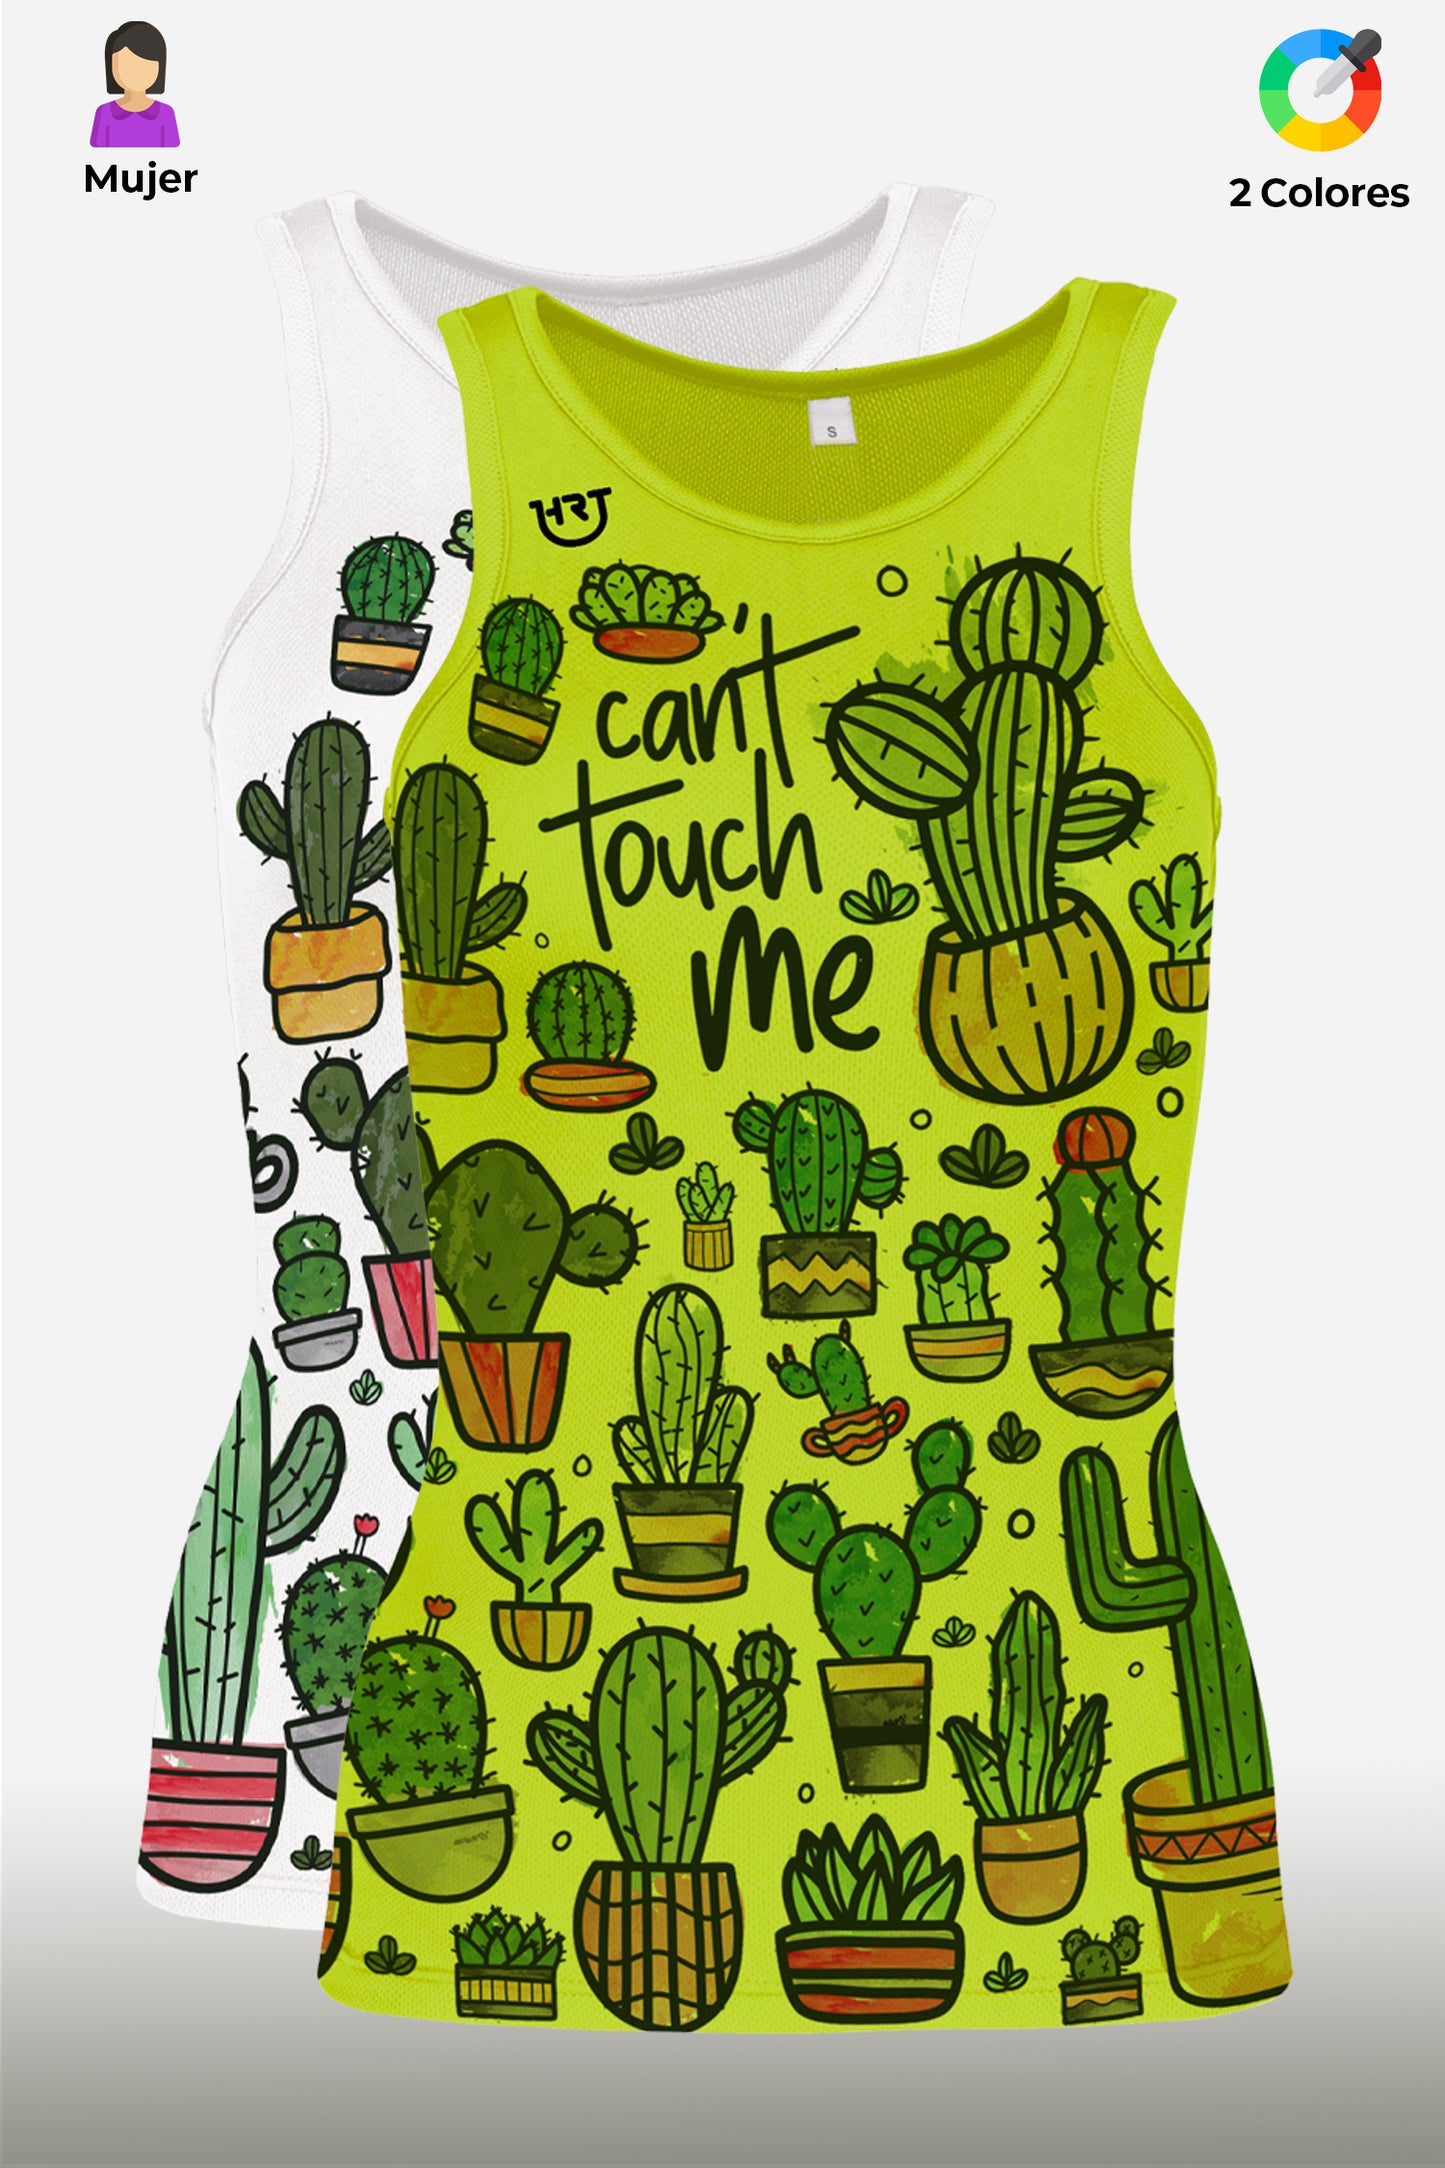 Can't Touch Me - Camiseta Tirantes Mujer